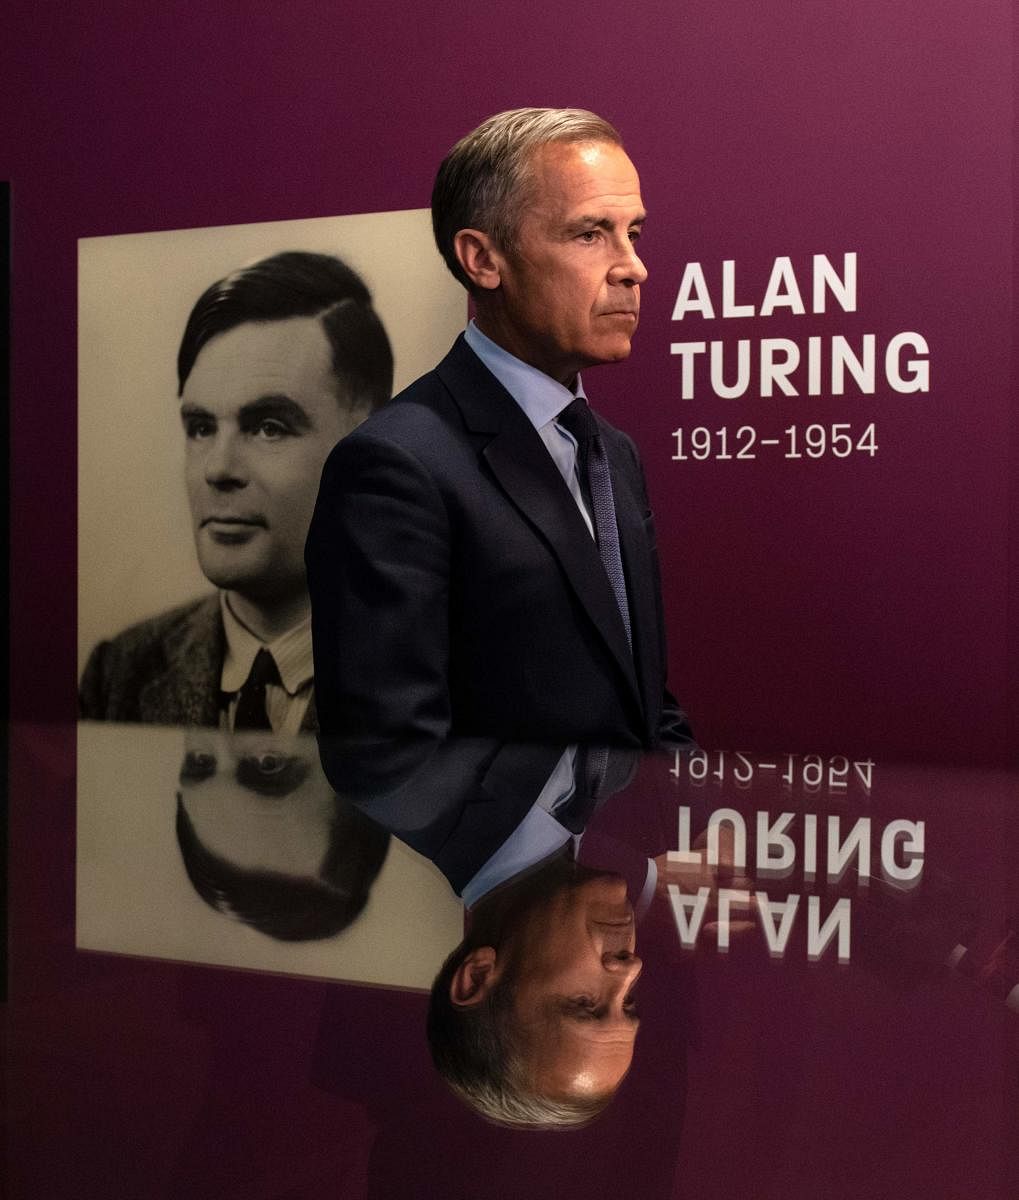 Alan Turing to feature on new 50 pound note